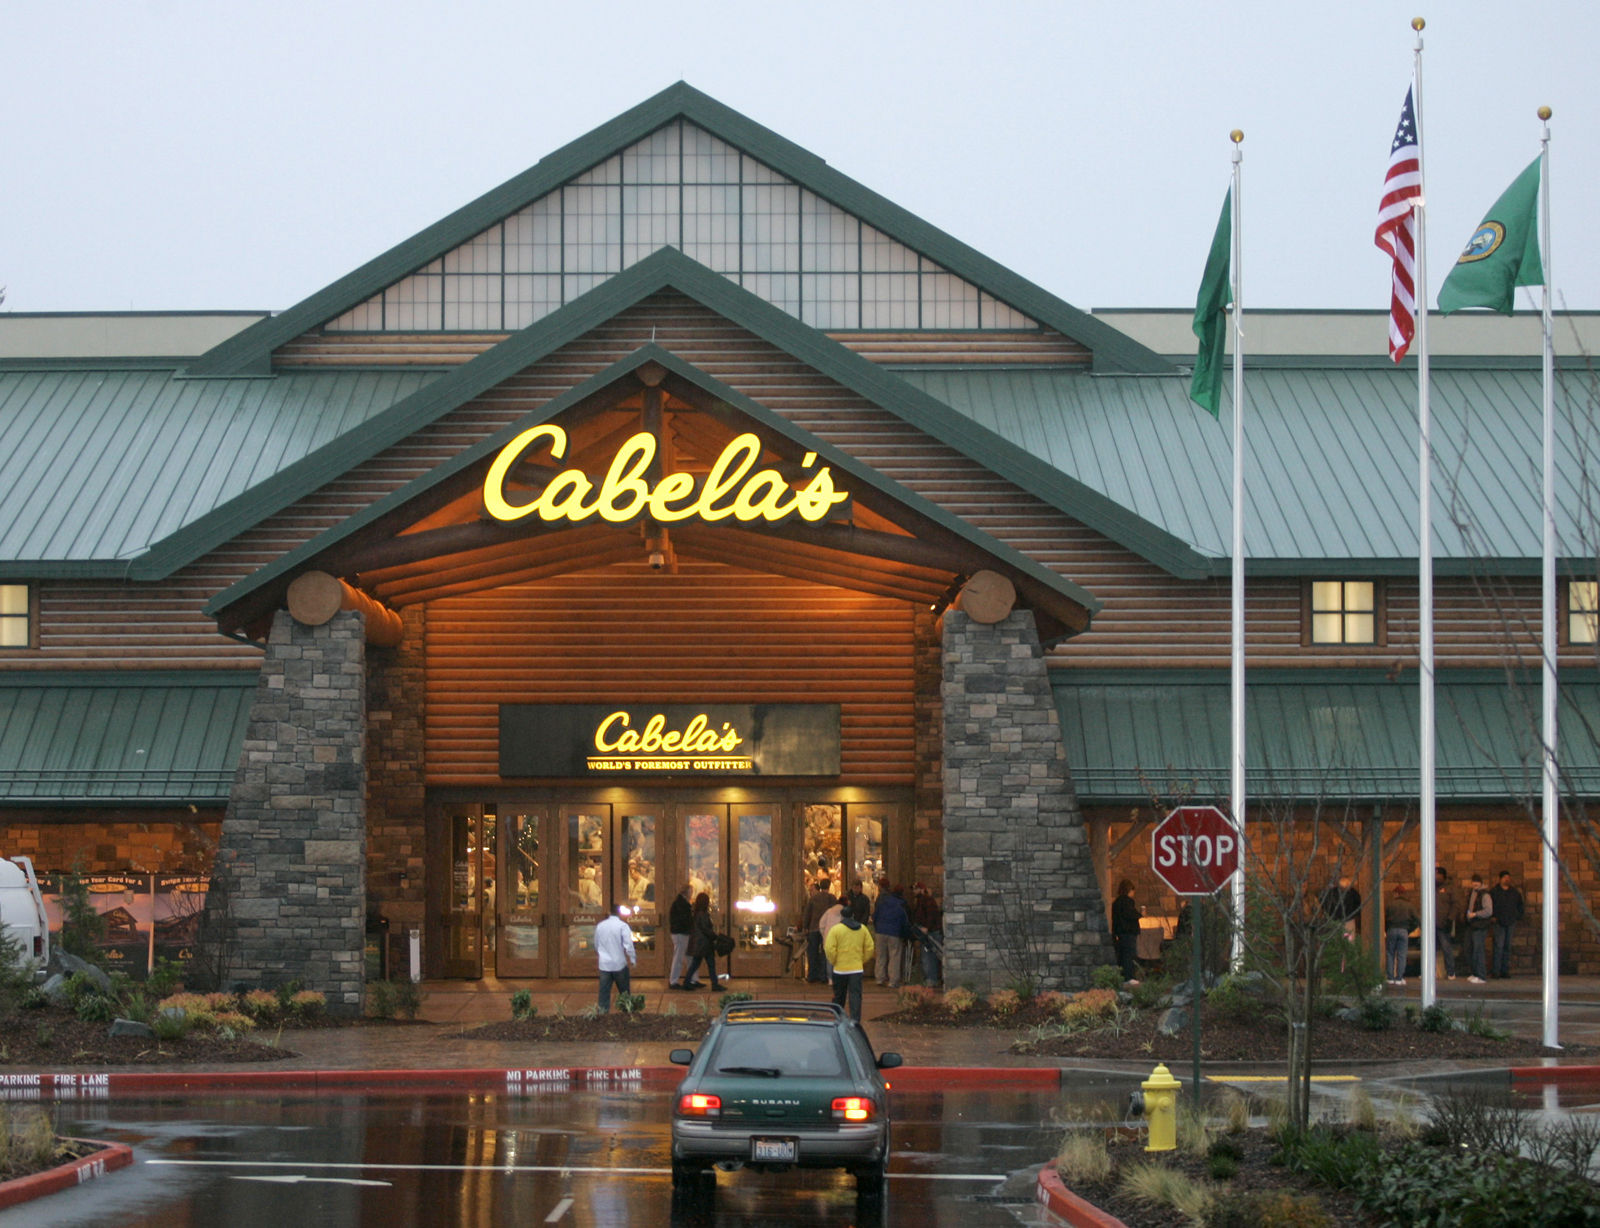 The new Cabela's store in Lacey, Wash. is shown Friday, Nov. 16, 2007 on the outdoor-supply megastore's first day of business. The store in Lacey is the third-largest store operated by the Nebraska-based Cabela's, and features a stocked aquarium, a restaurant, and a two-story mountain populated by full-sized animal mounts. (AP Photo/Ted S. Warren)